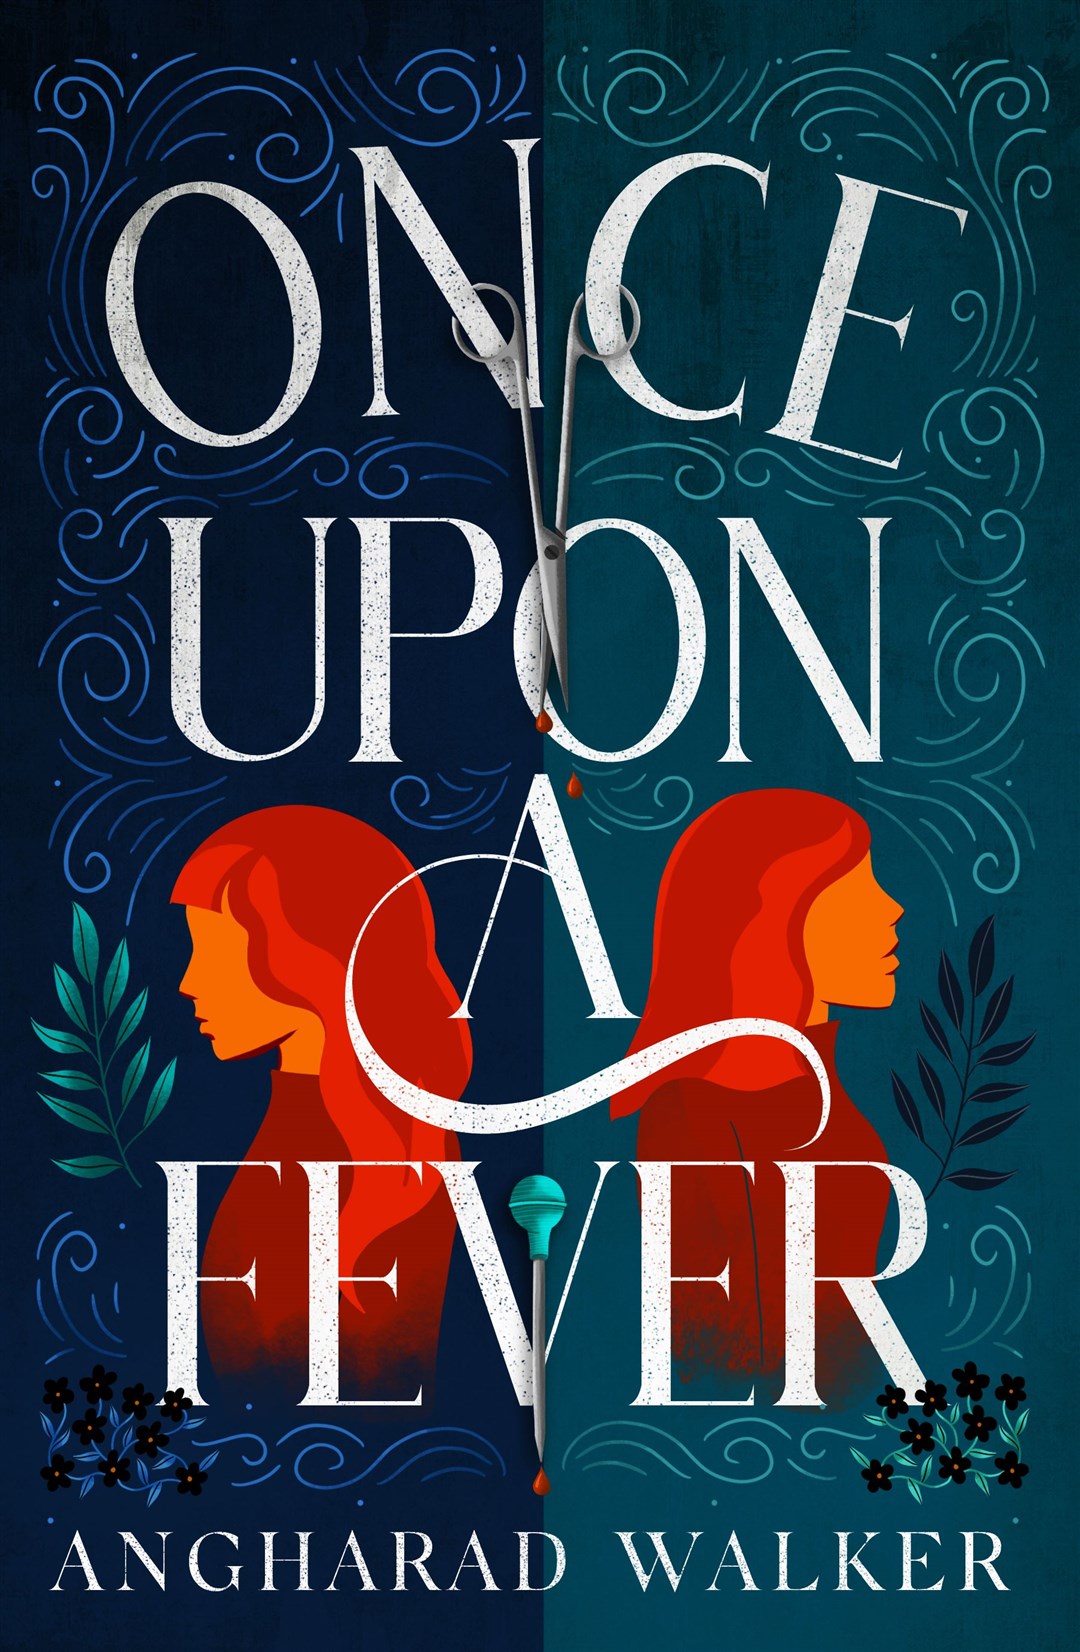 Once Upon A Fever by Angharad Walker (Waterstones/PA)